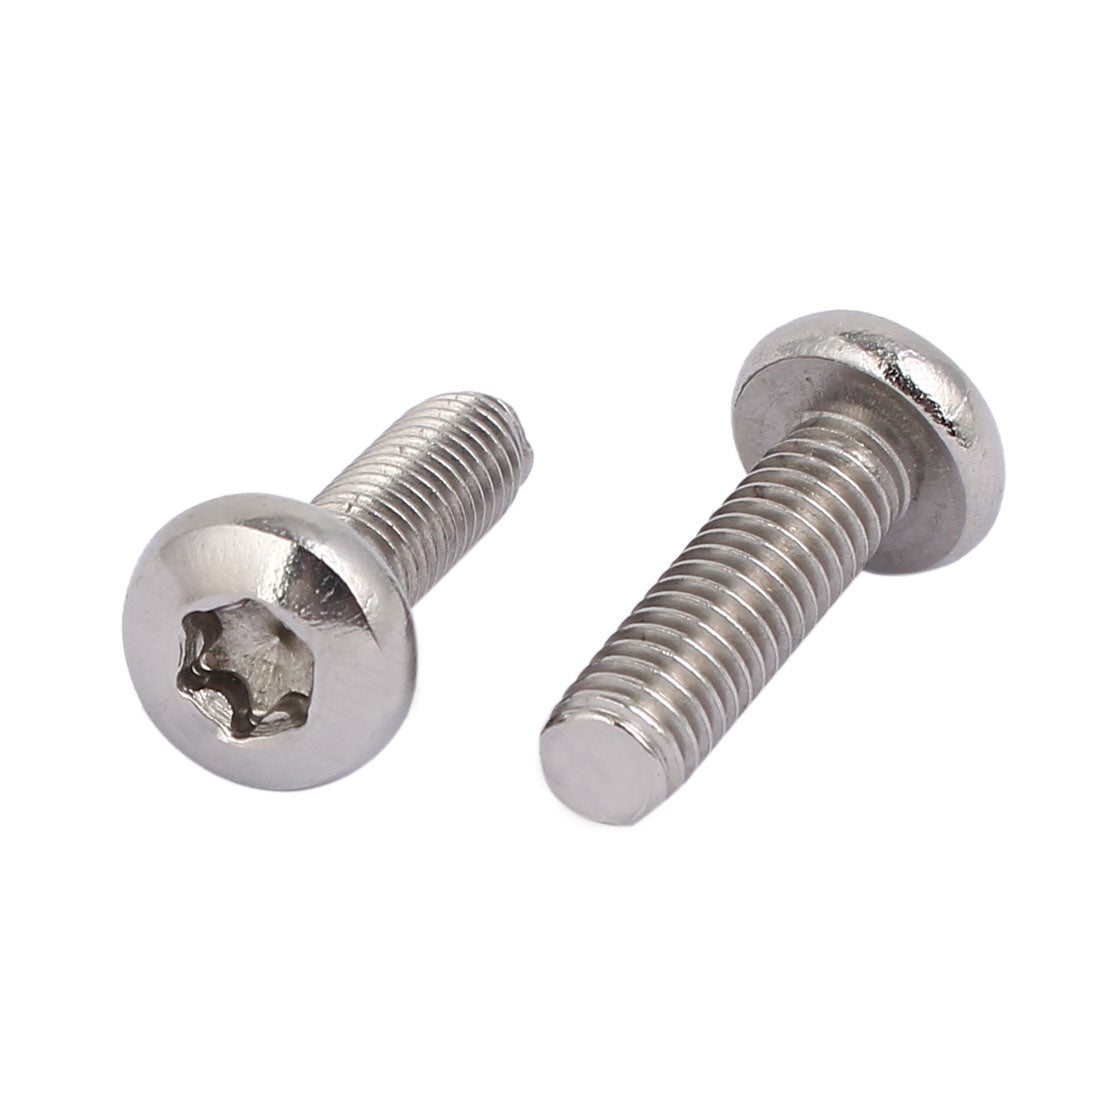 uxcell Uxcell M6x20mm 304 Stainless Steel Button Head Torx Socket Cap Screws Fasteners 8pcs